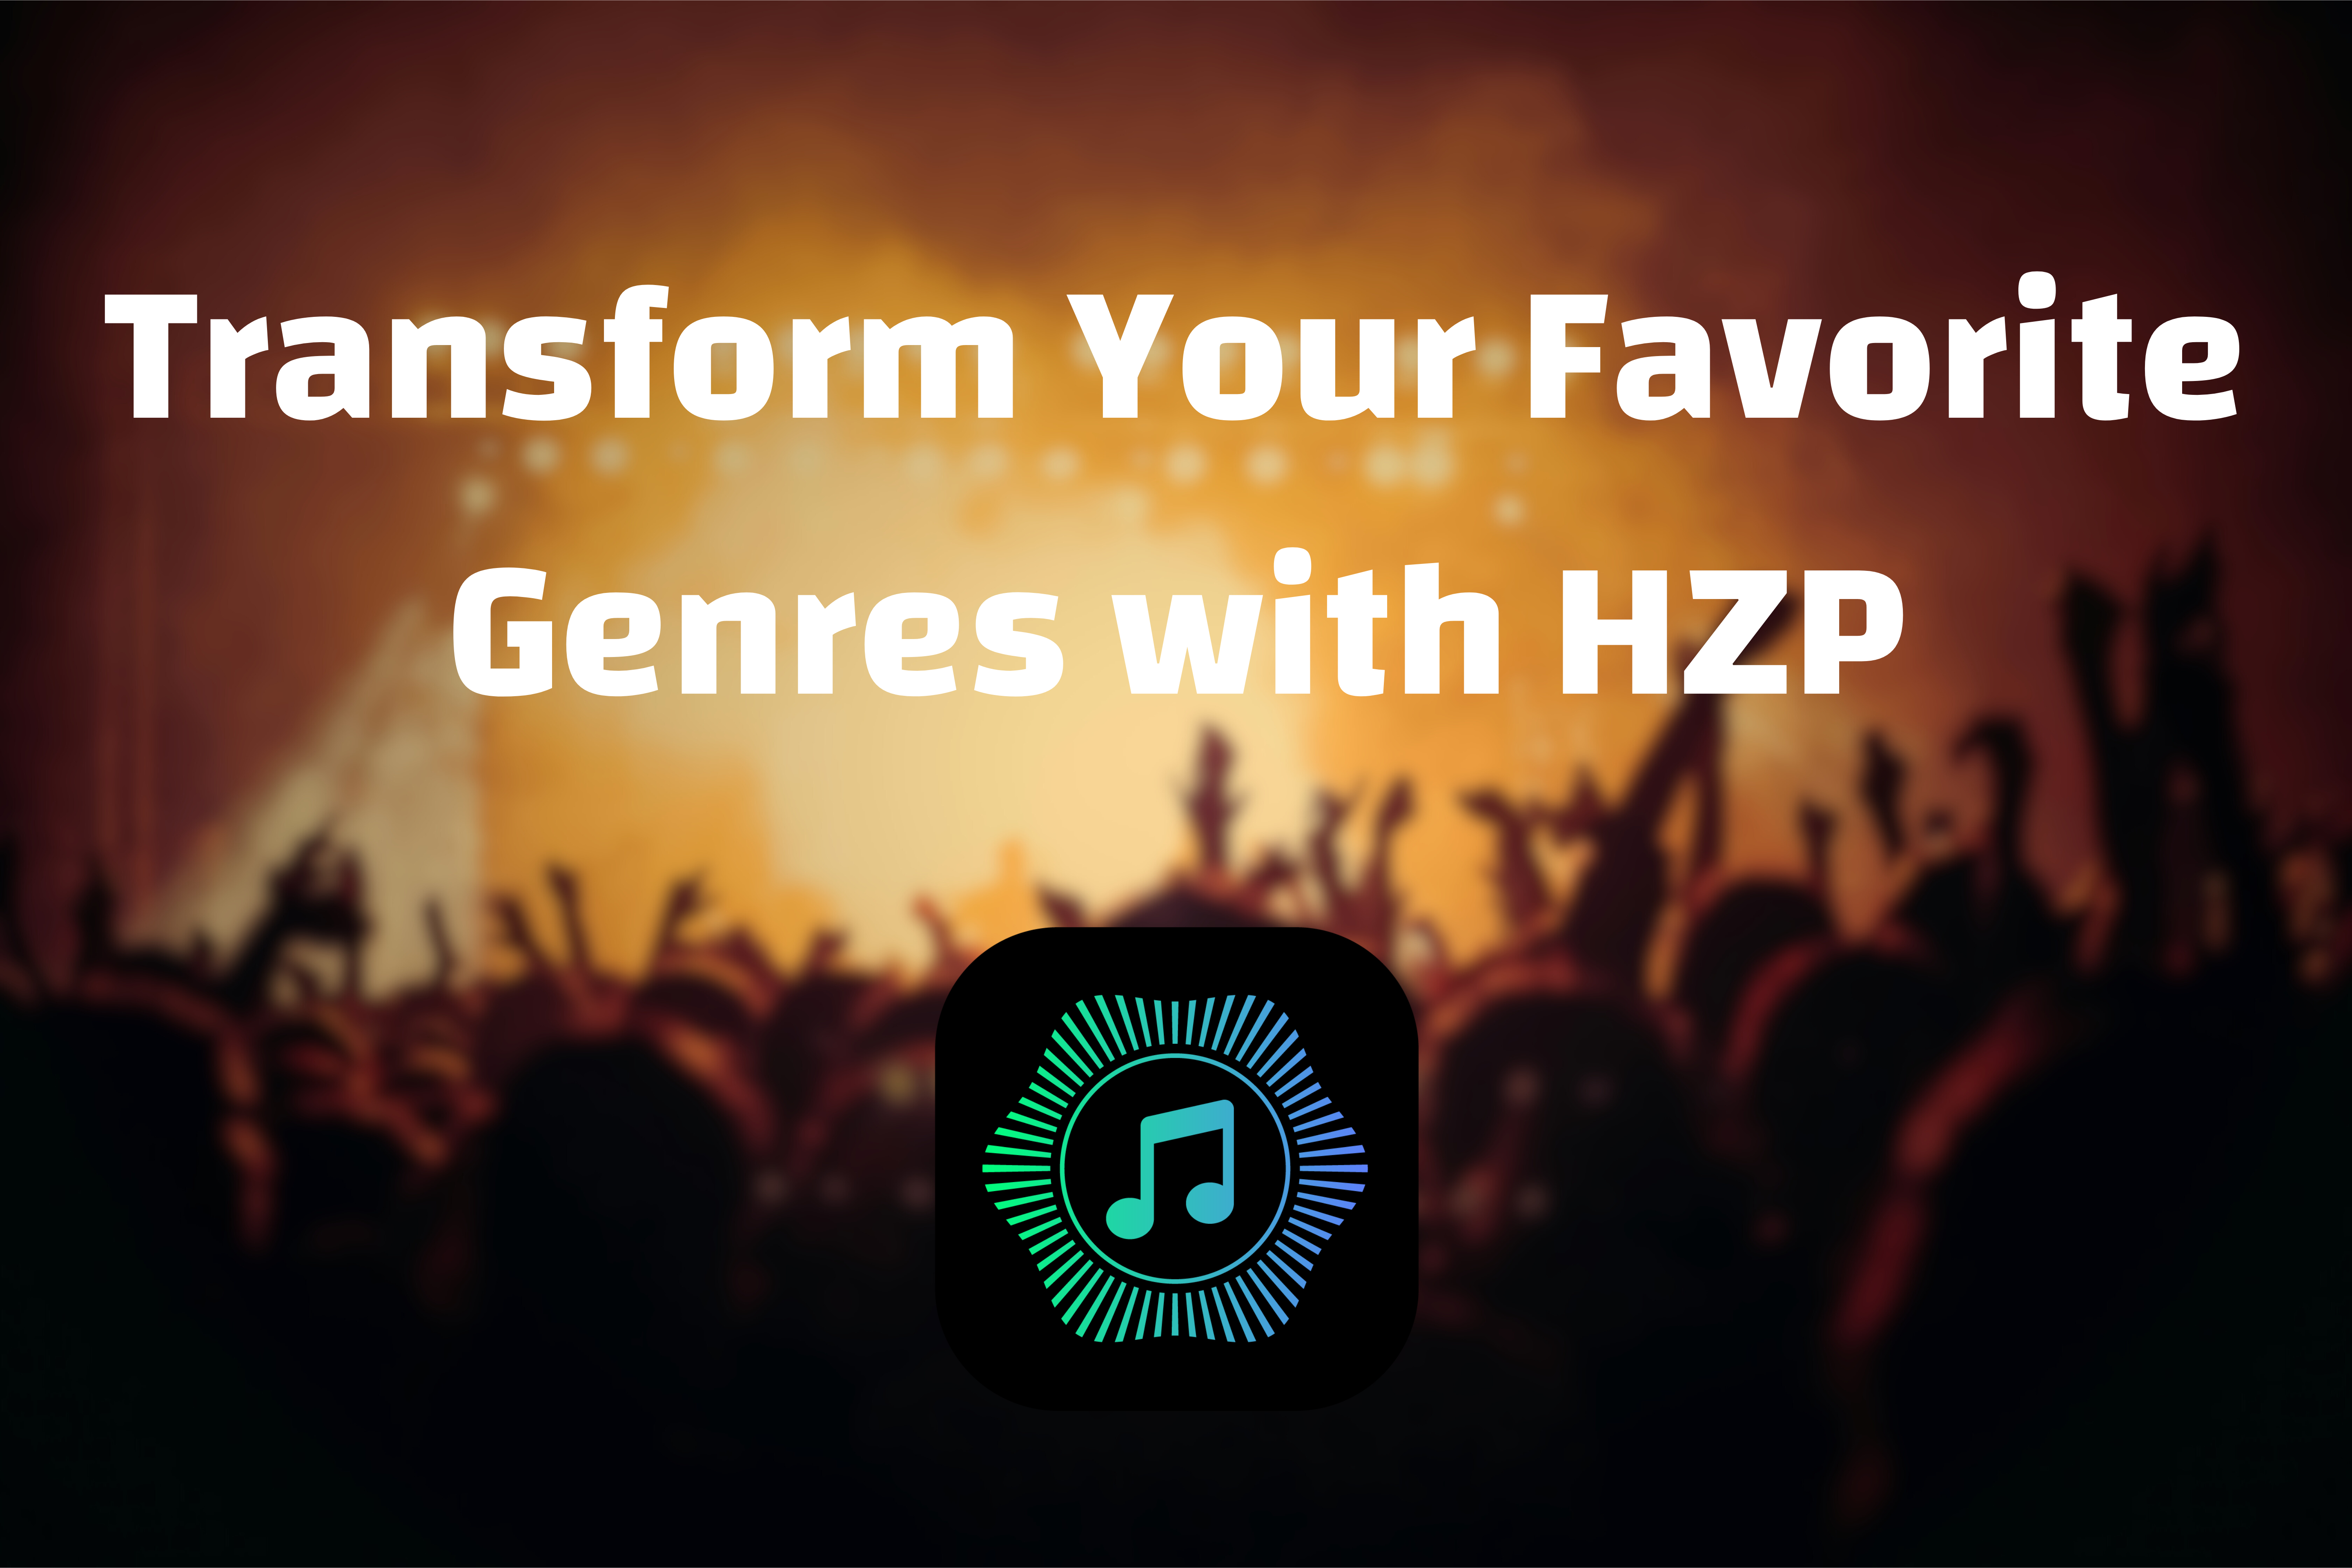 From EDM to Hip-Hop: Transform Your Favorite Genres with HZP